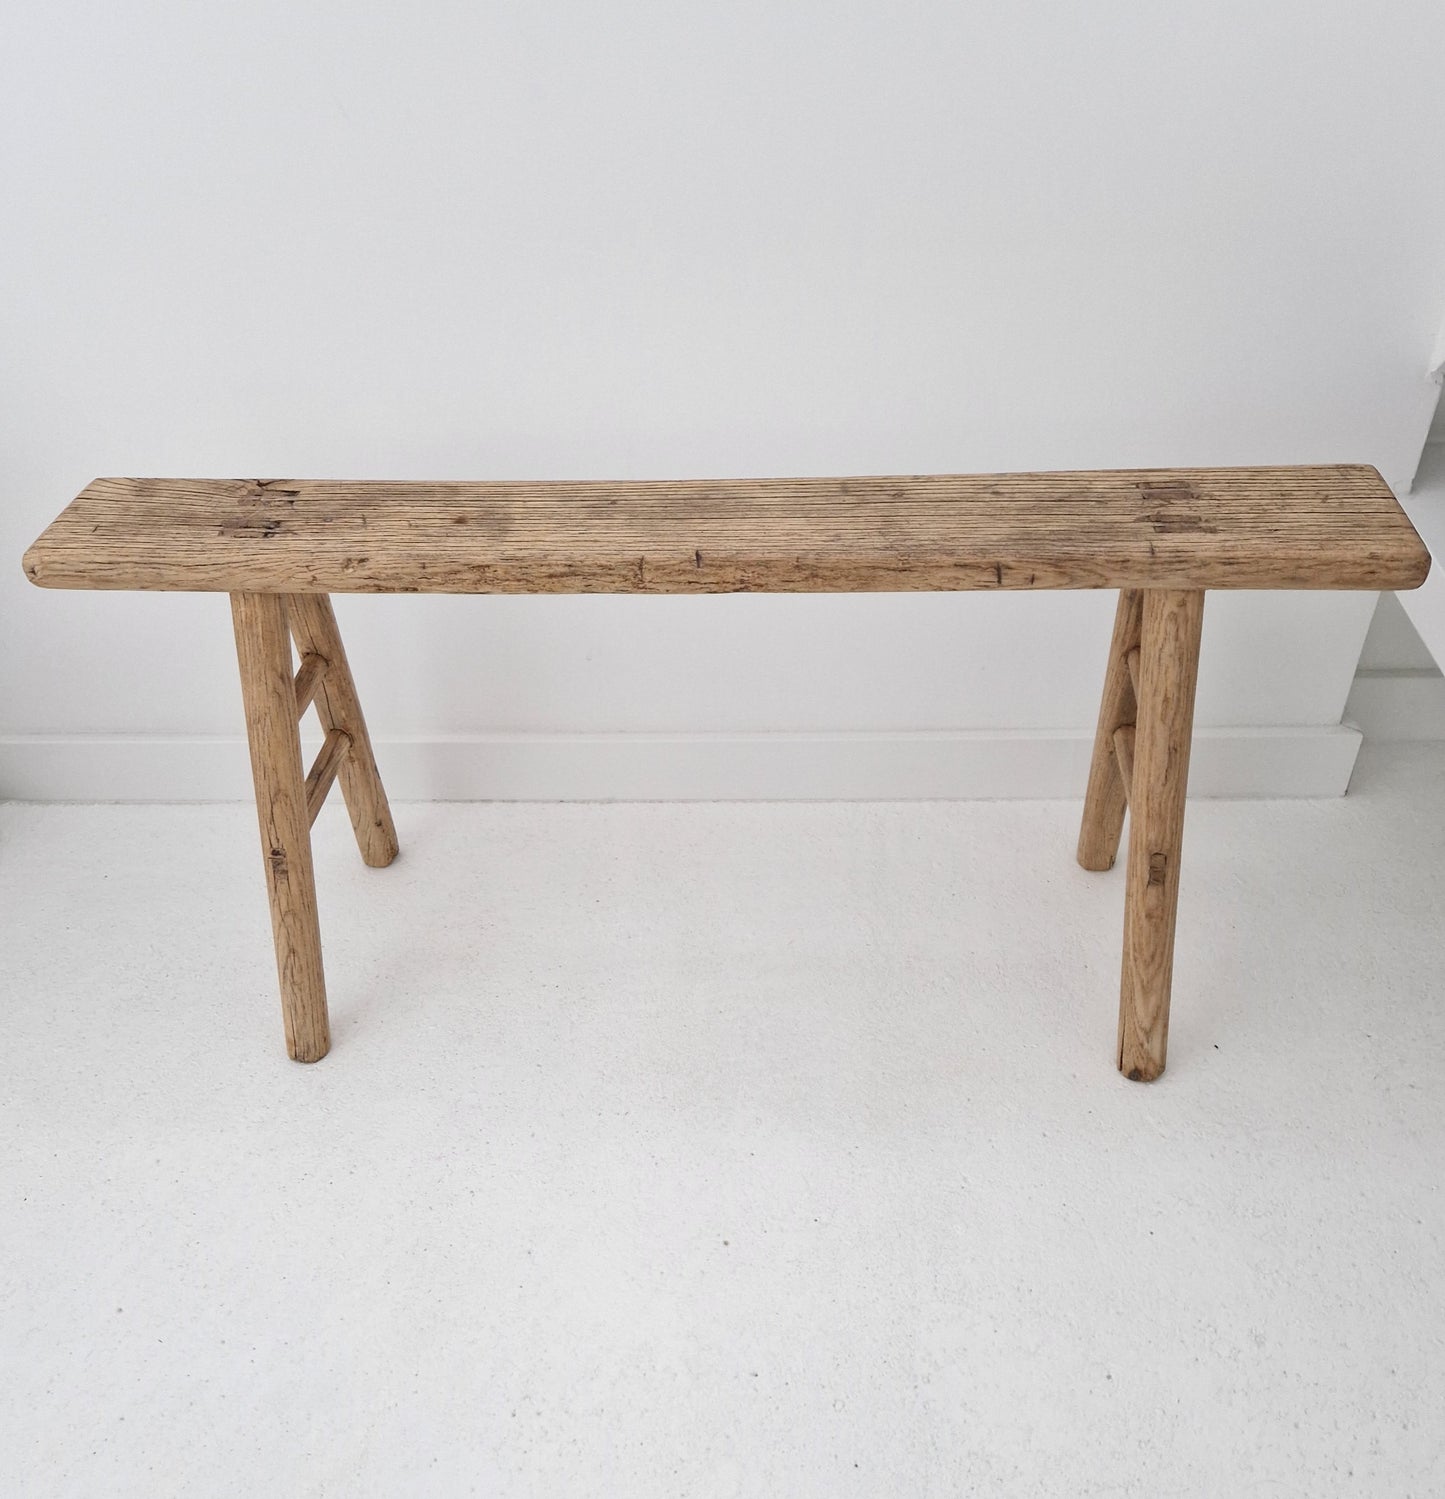 Old wooden bench #3 (112cm)